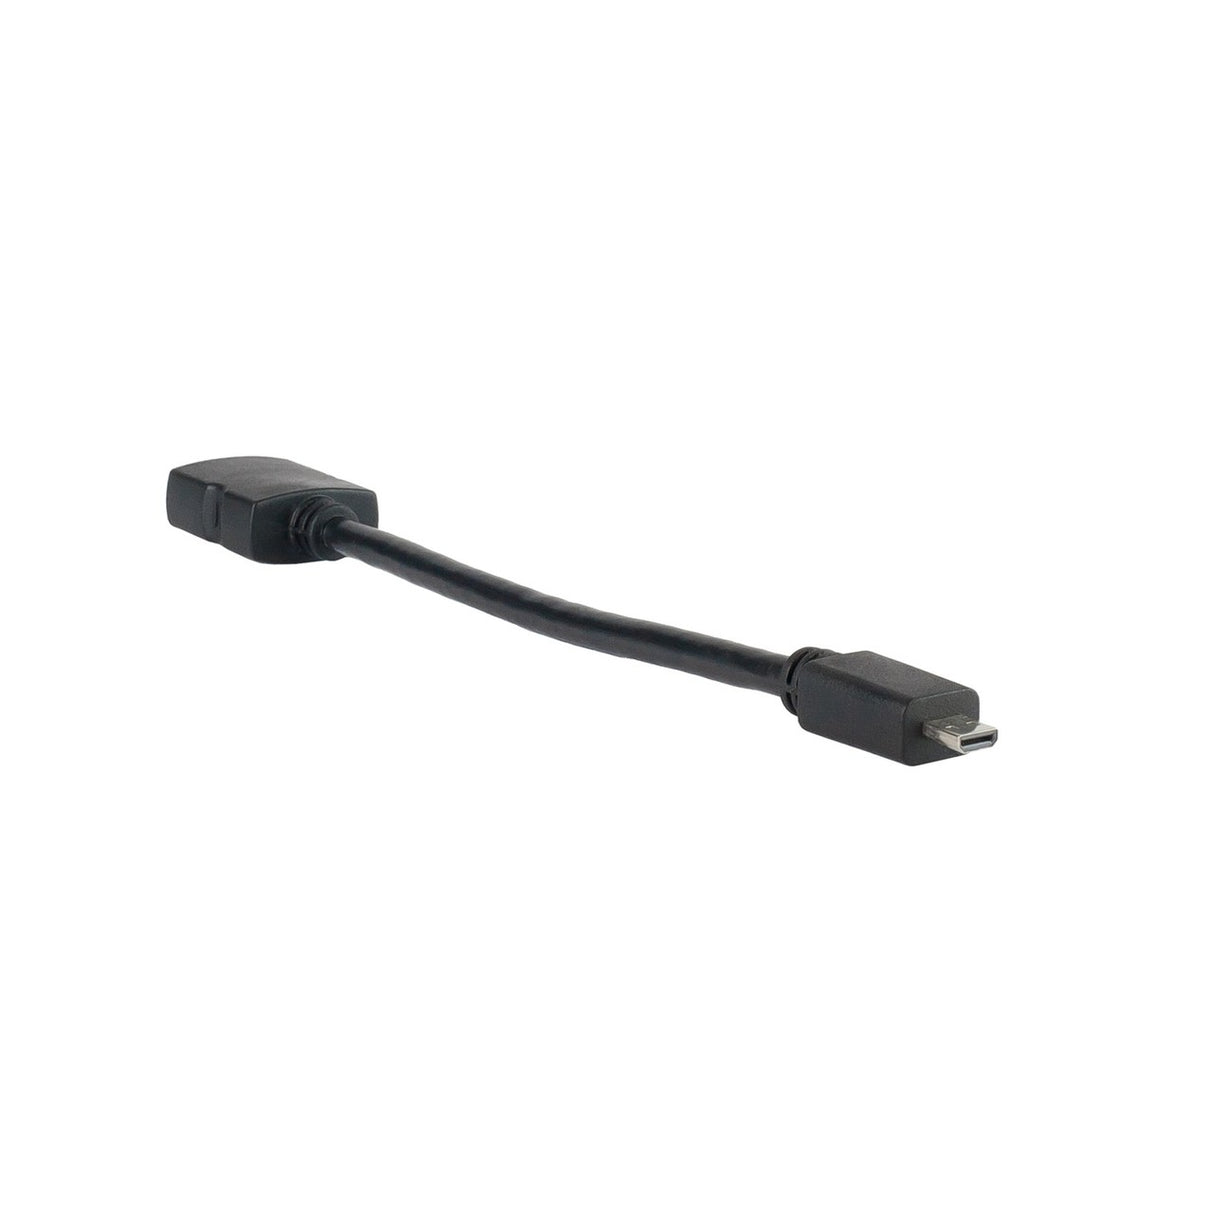 DigitaLinx AR-MDHM-HDF | 8 Inch Micro HDMI D Male to HDMI Female Cable Adapter